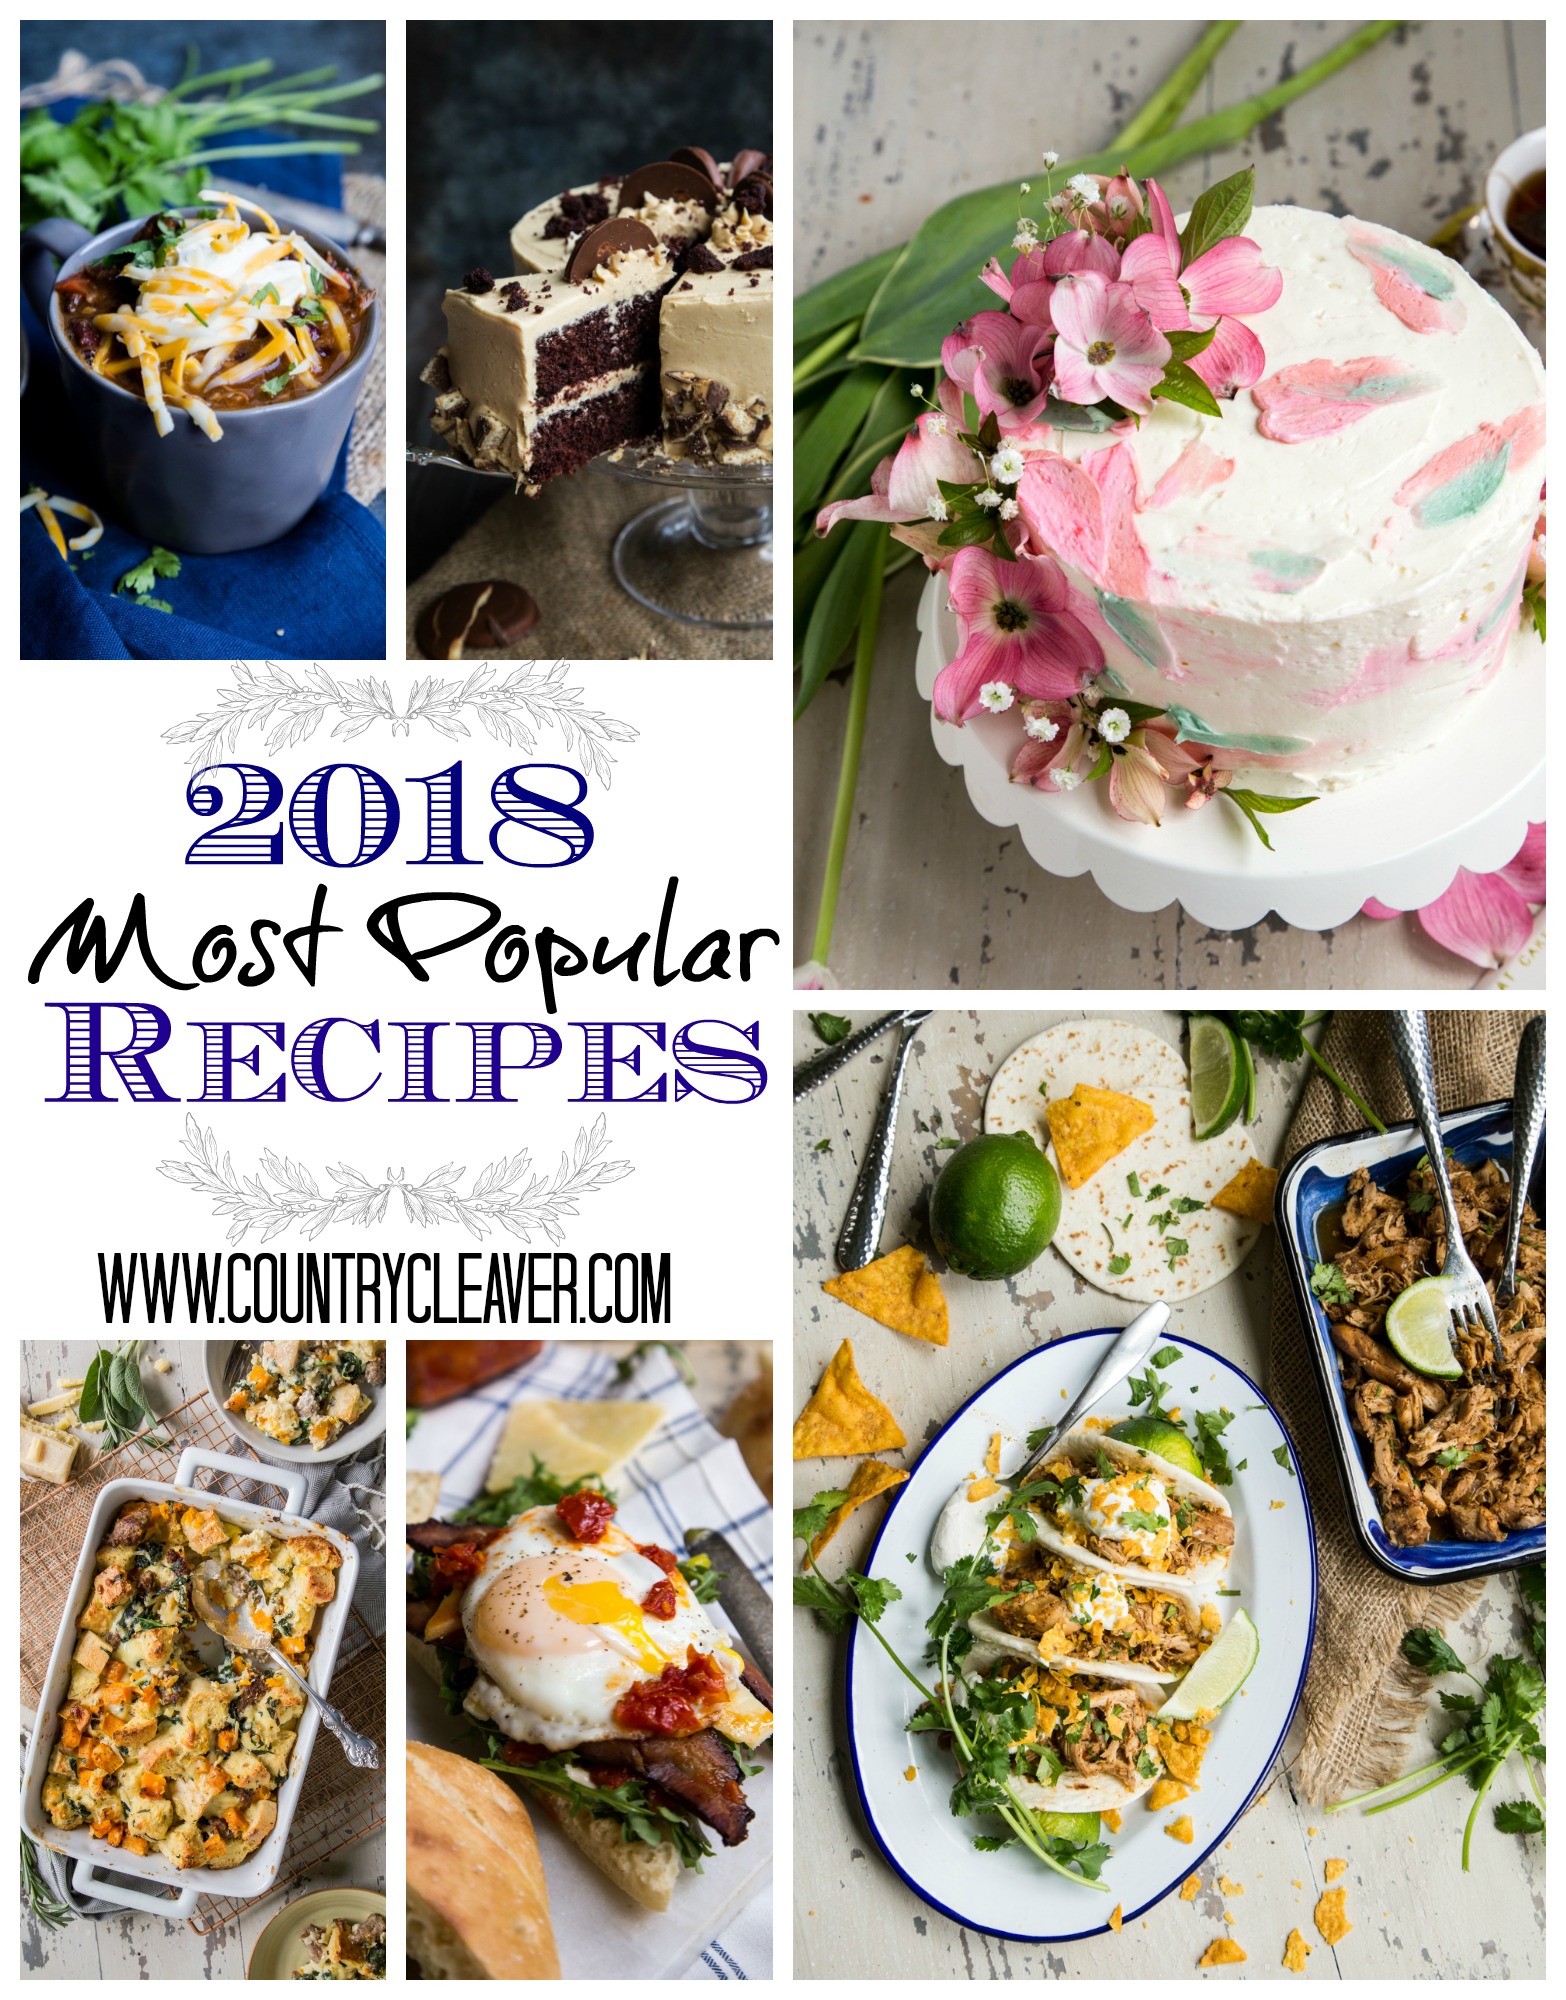 2018 Most Popular Recipes collage with cake chicken chili and more